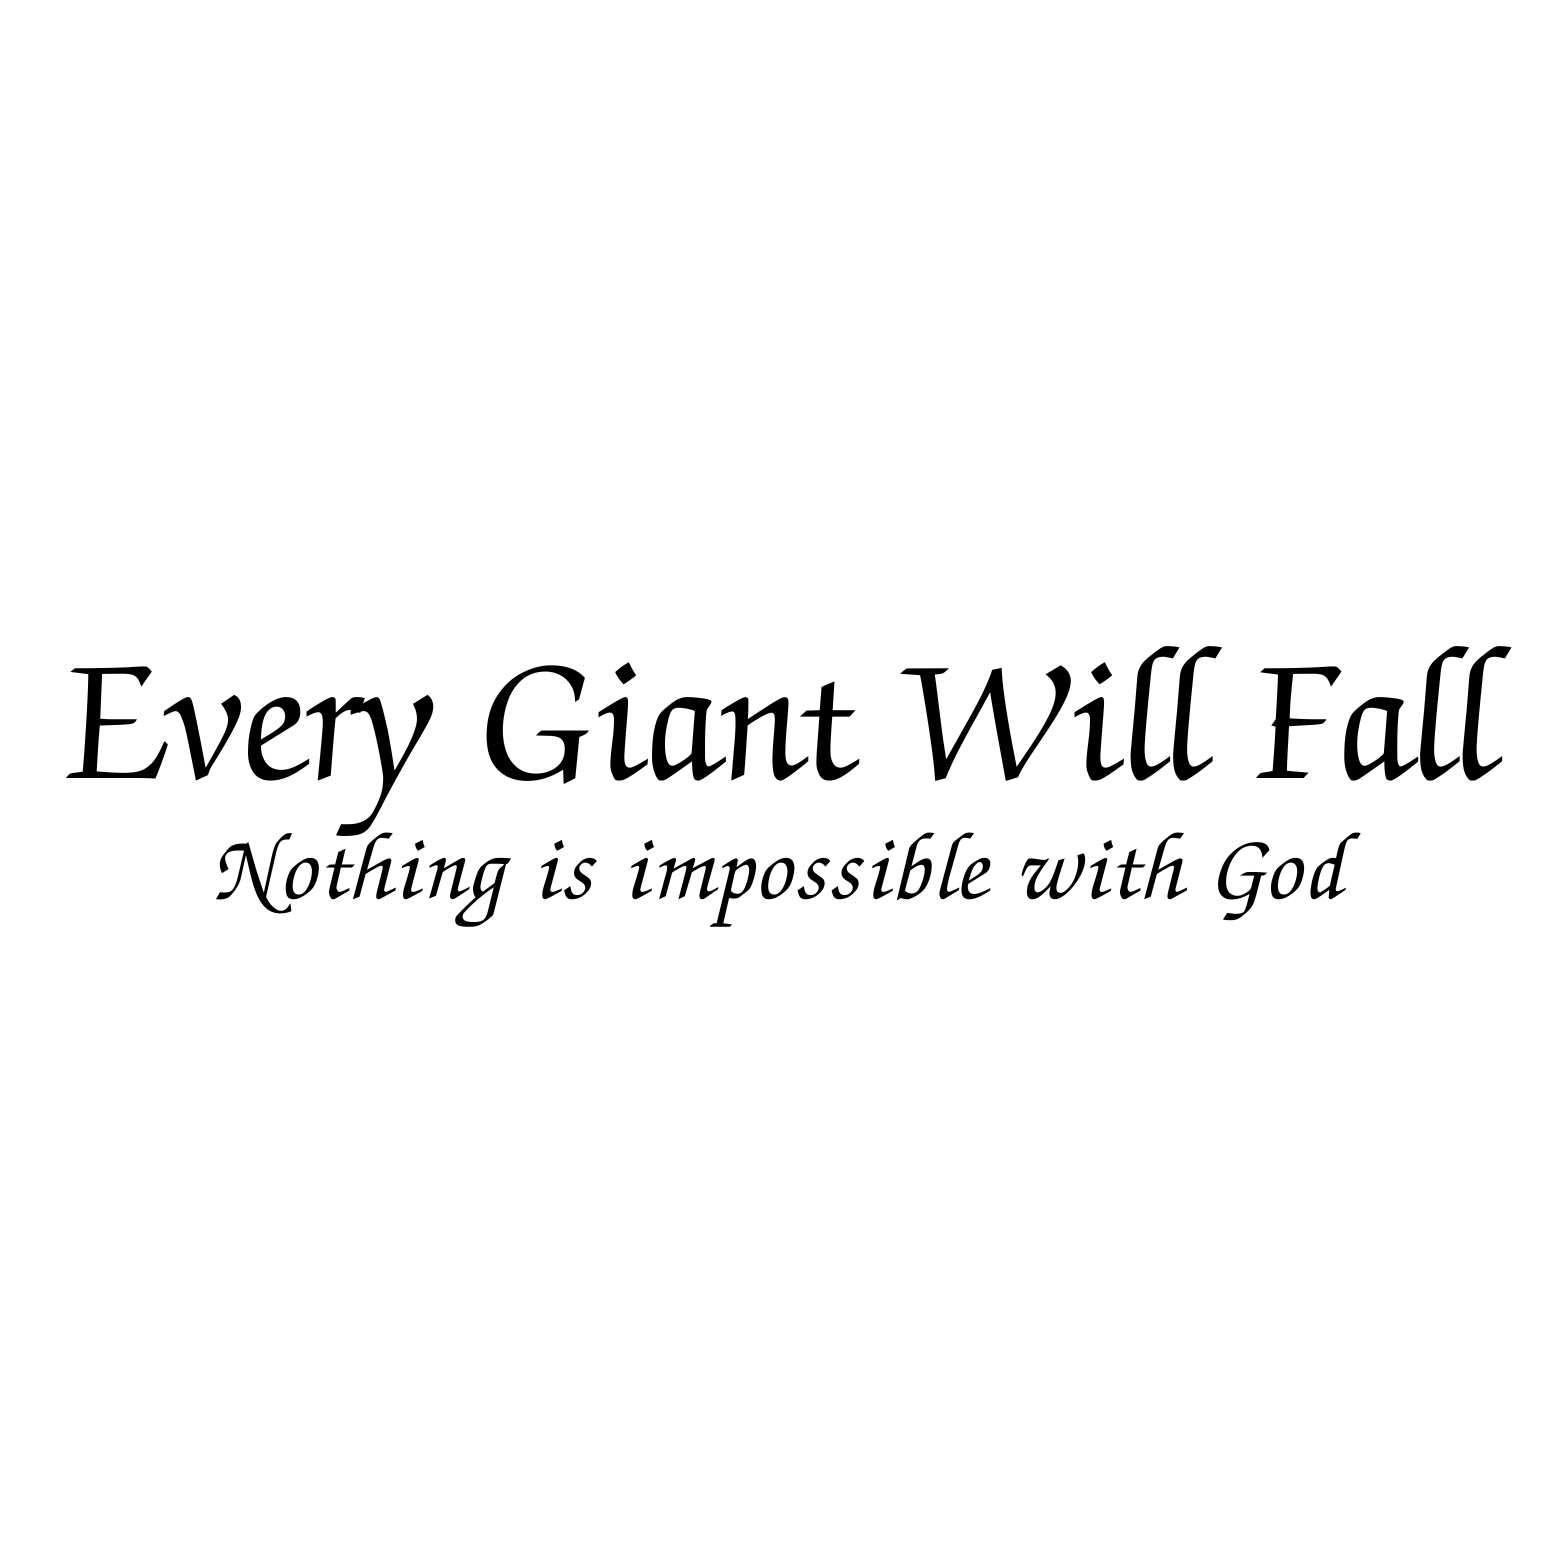 EVERY GIANT WILL FALL